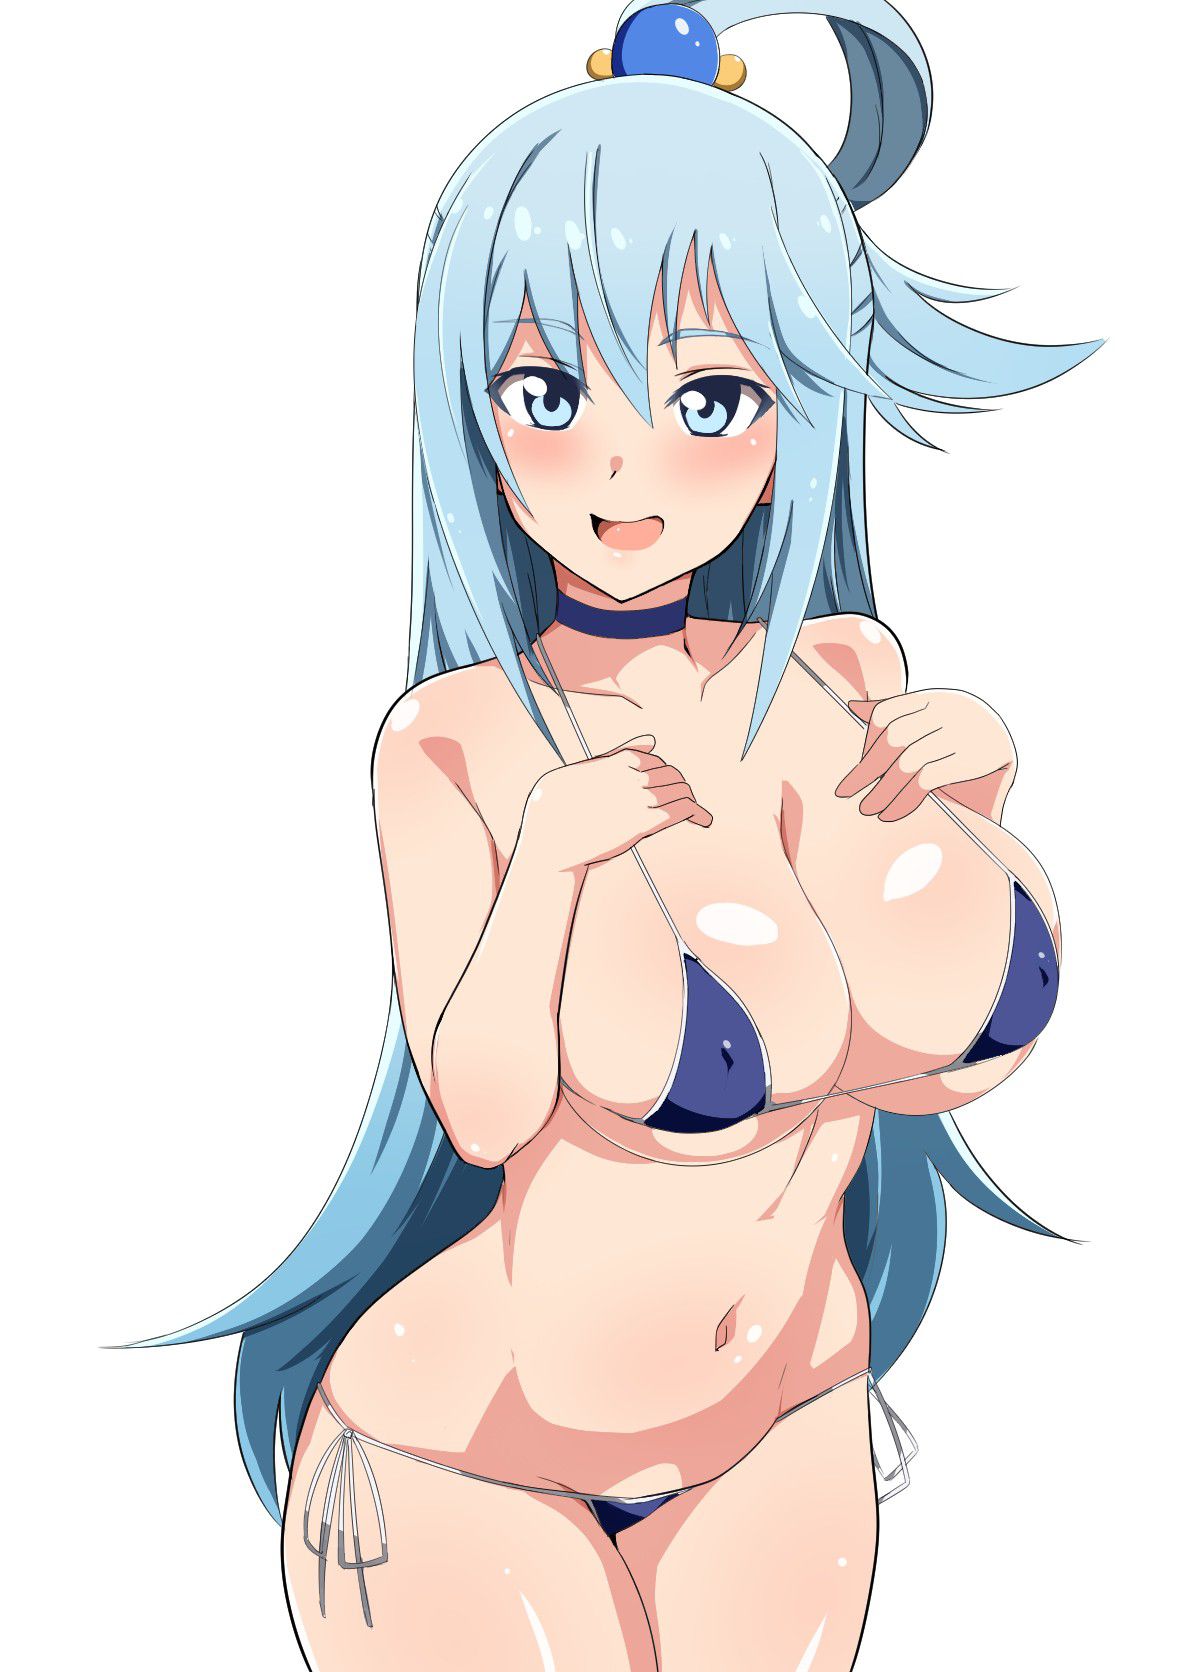 [Secondary] erotic image of a cute girl with blue hair 22